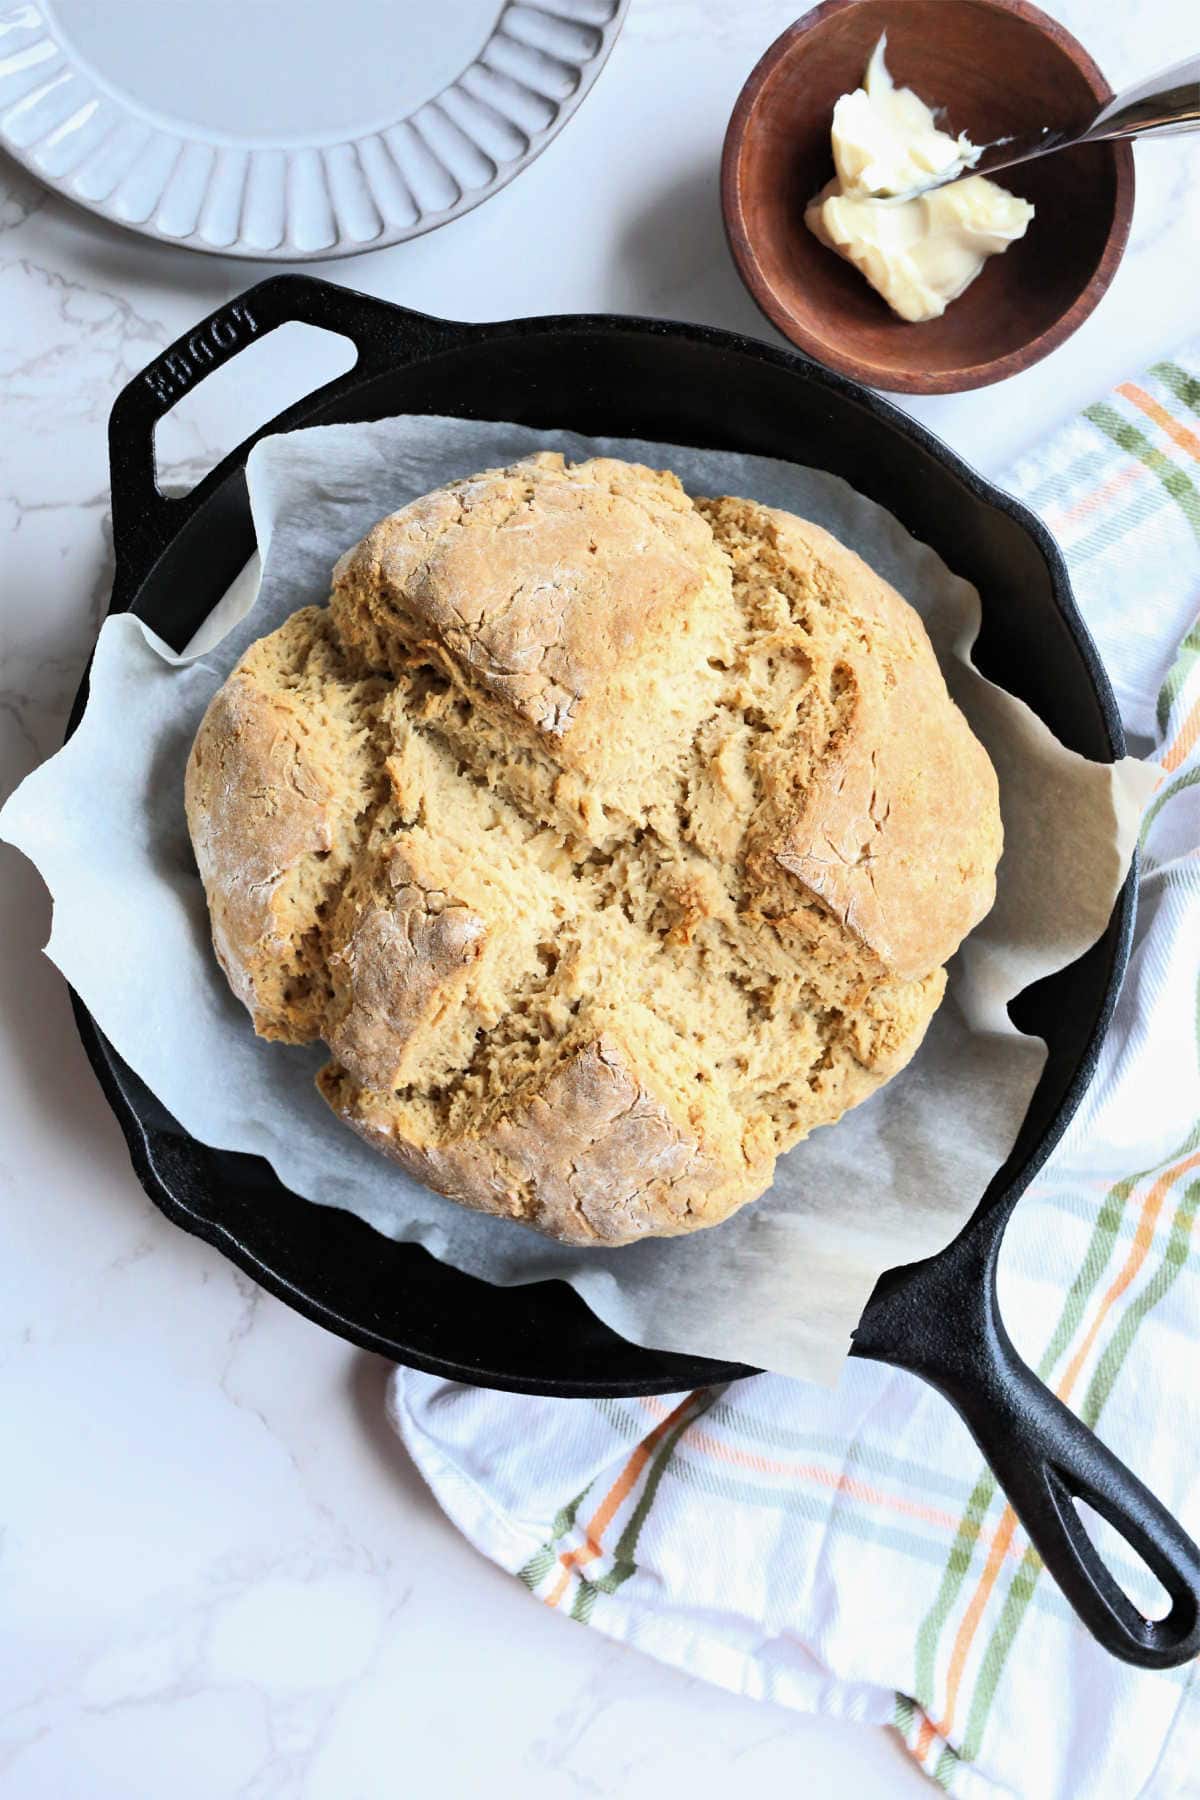 Overview of Irish Soda Bread in an Iron Skillet with a Hand Towel